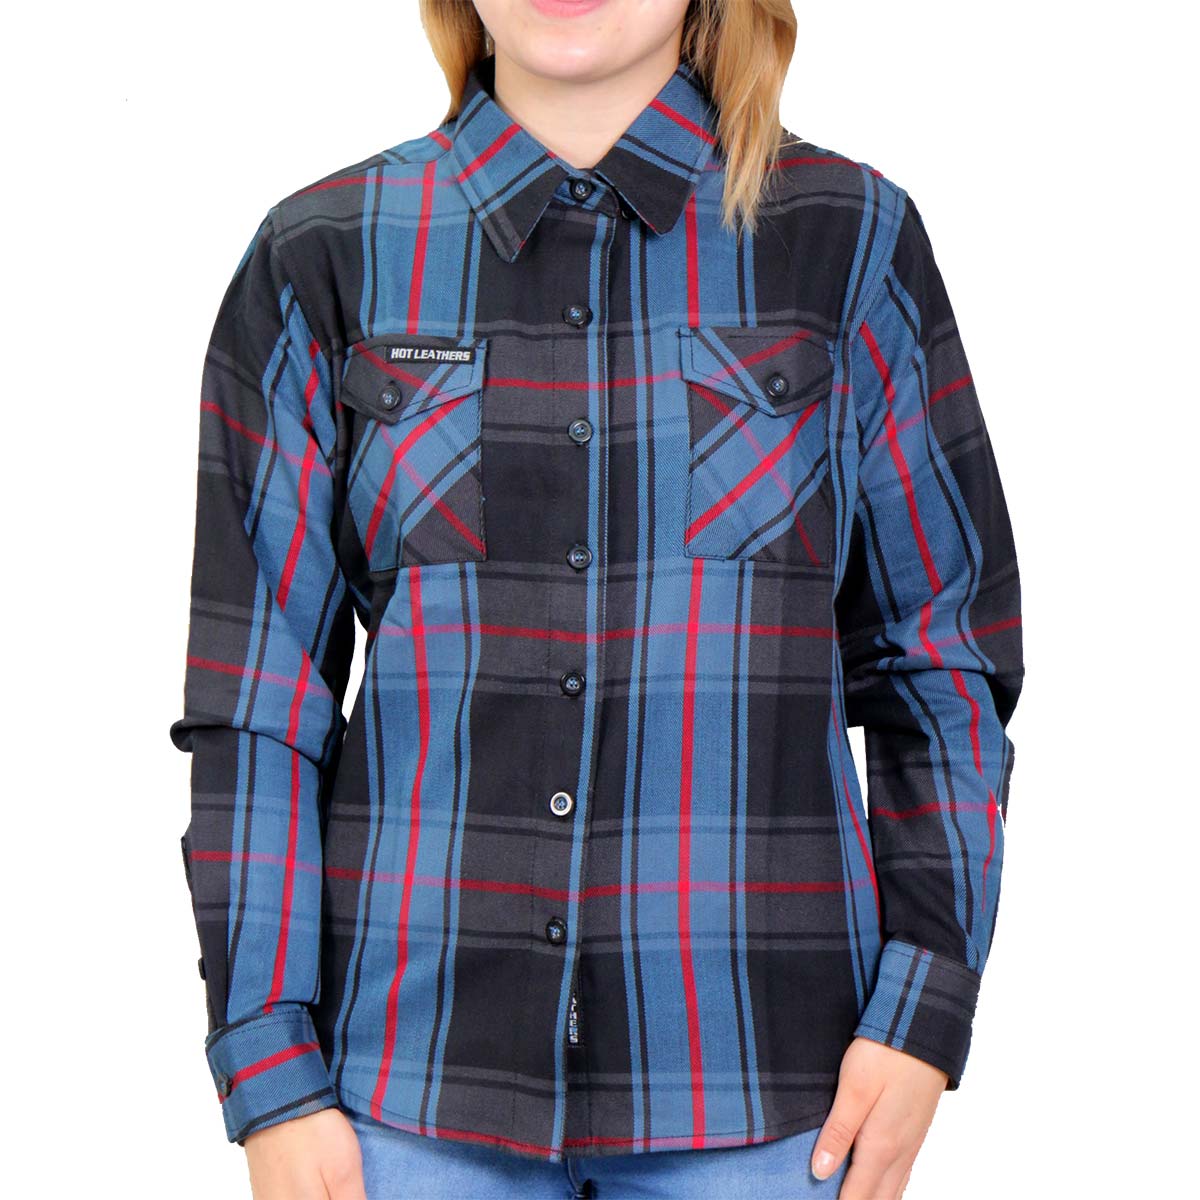 Hot Leathers FLL3007 Ladies 'Long Live The King' Flannel Shirt